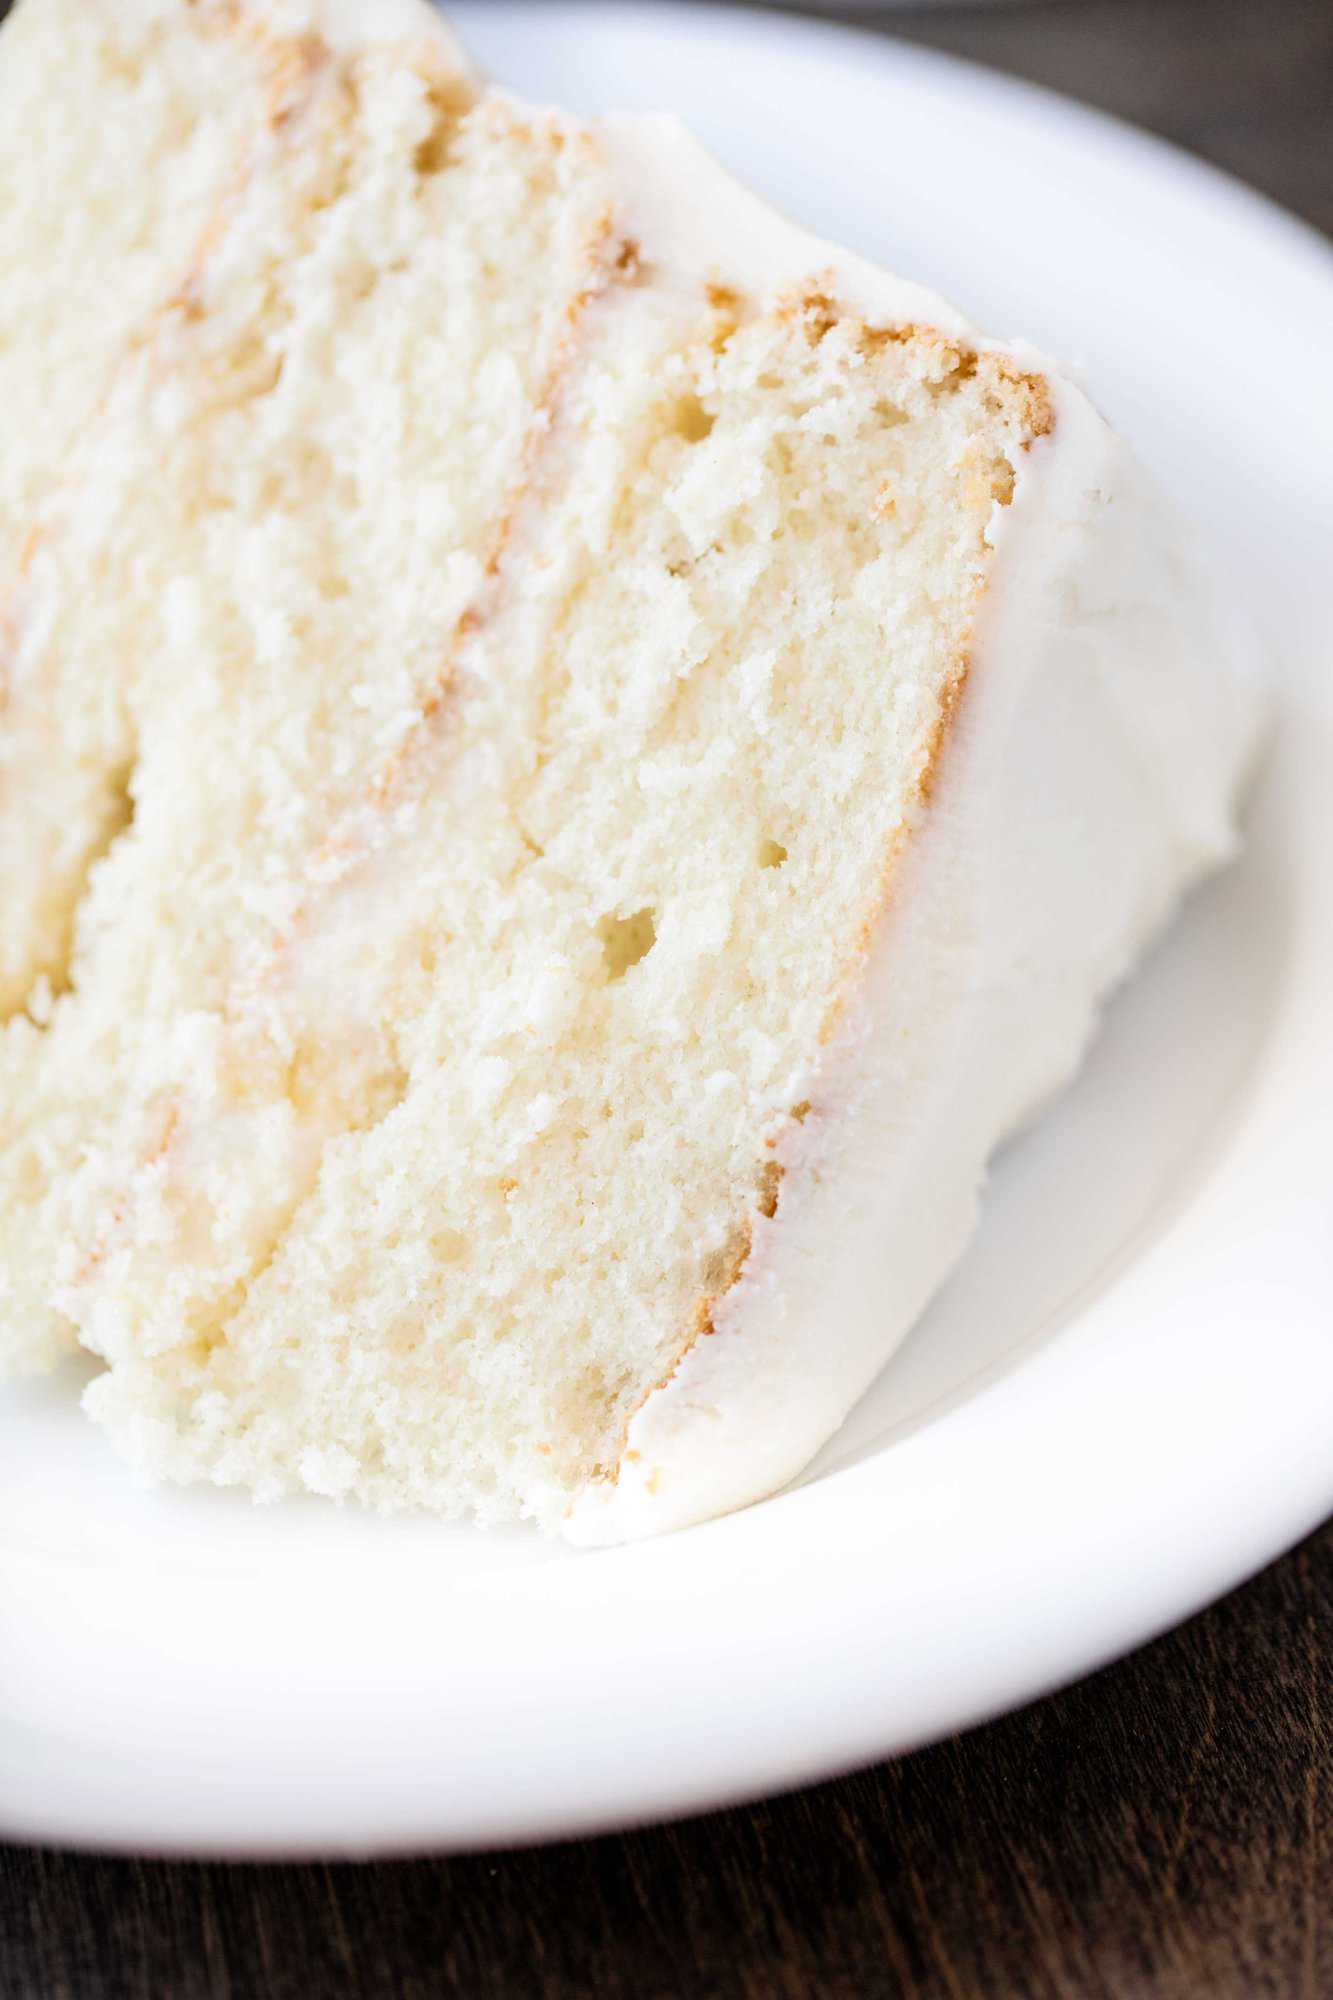 The Most Amazing White Cake is here! It's light, and airy, and absolutely gorgeous. This is the white cake you've been dreaming of!